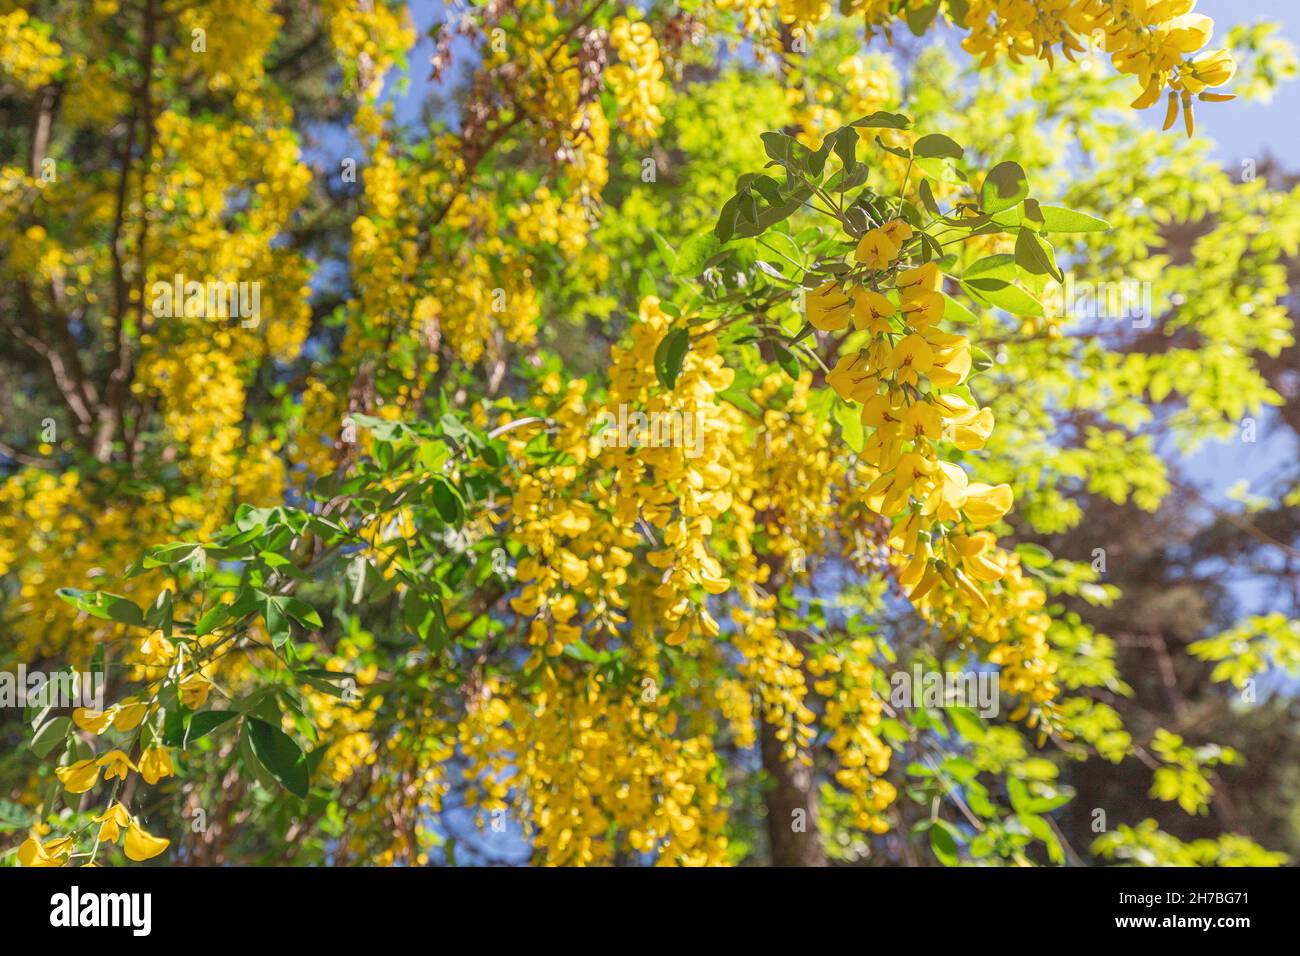 Siberian Peashrub or Caragana arborescens is a tree-like shrub that blooms in spring with beautiful yellow flowers in the garden or park Stock Photo